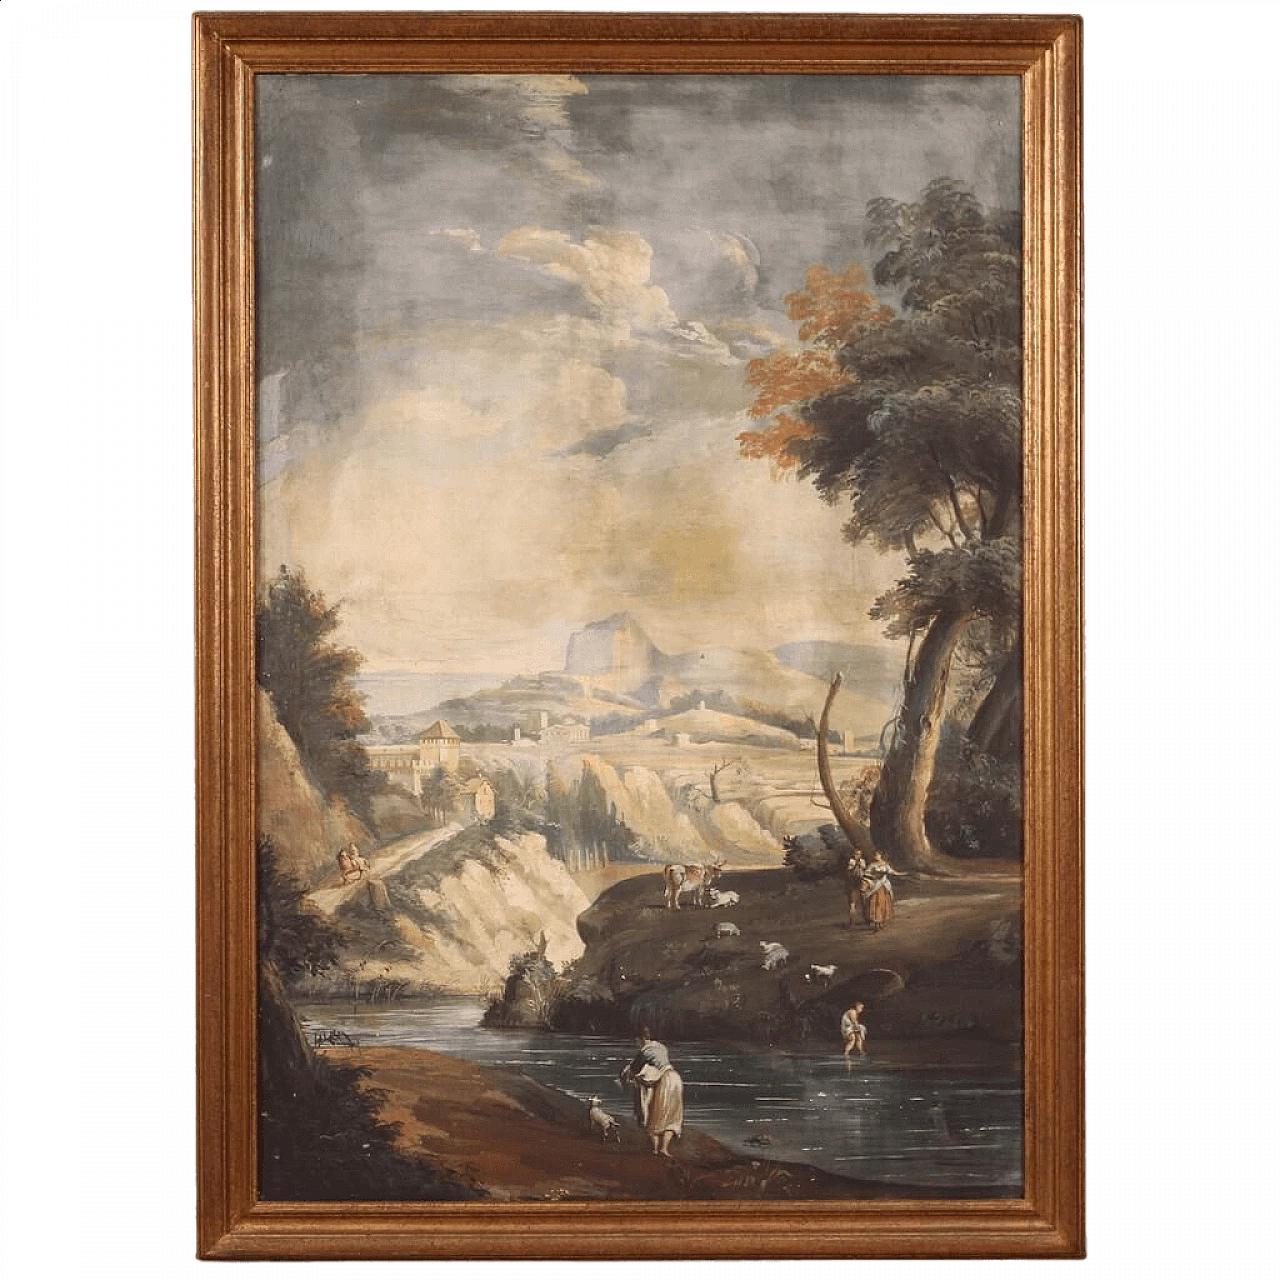 Landscape with figures, tempera painting on paper, late 18th century 16